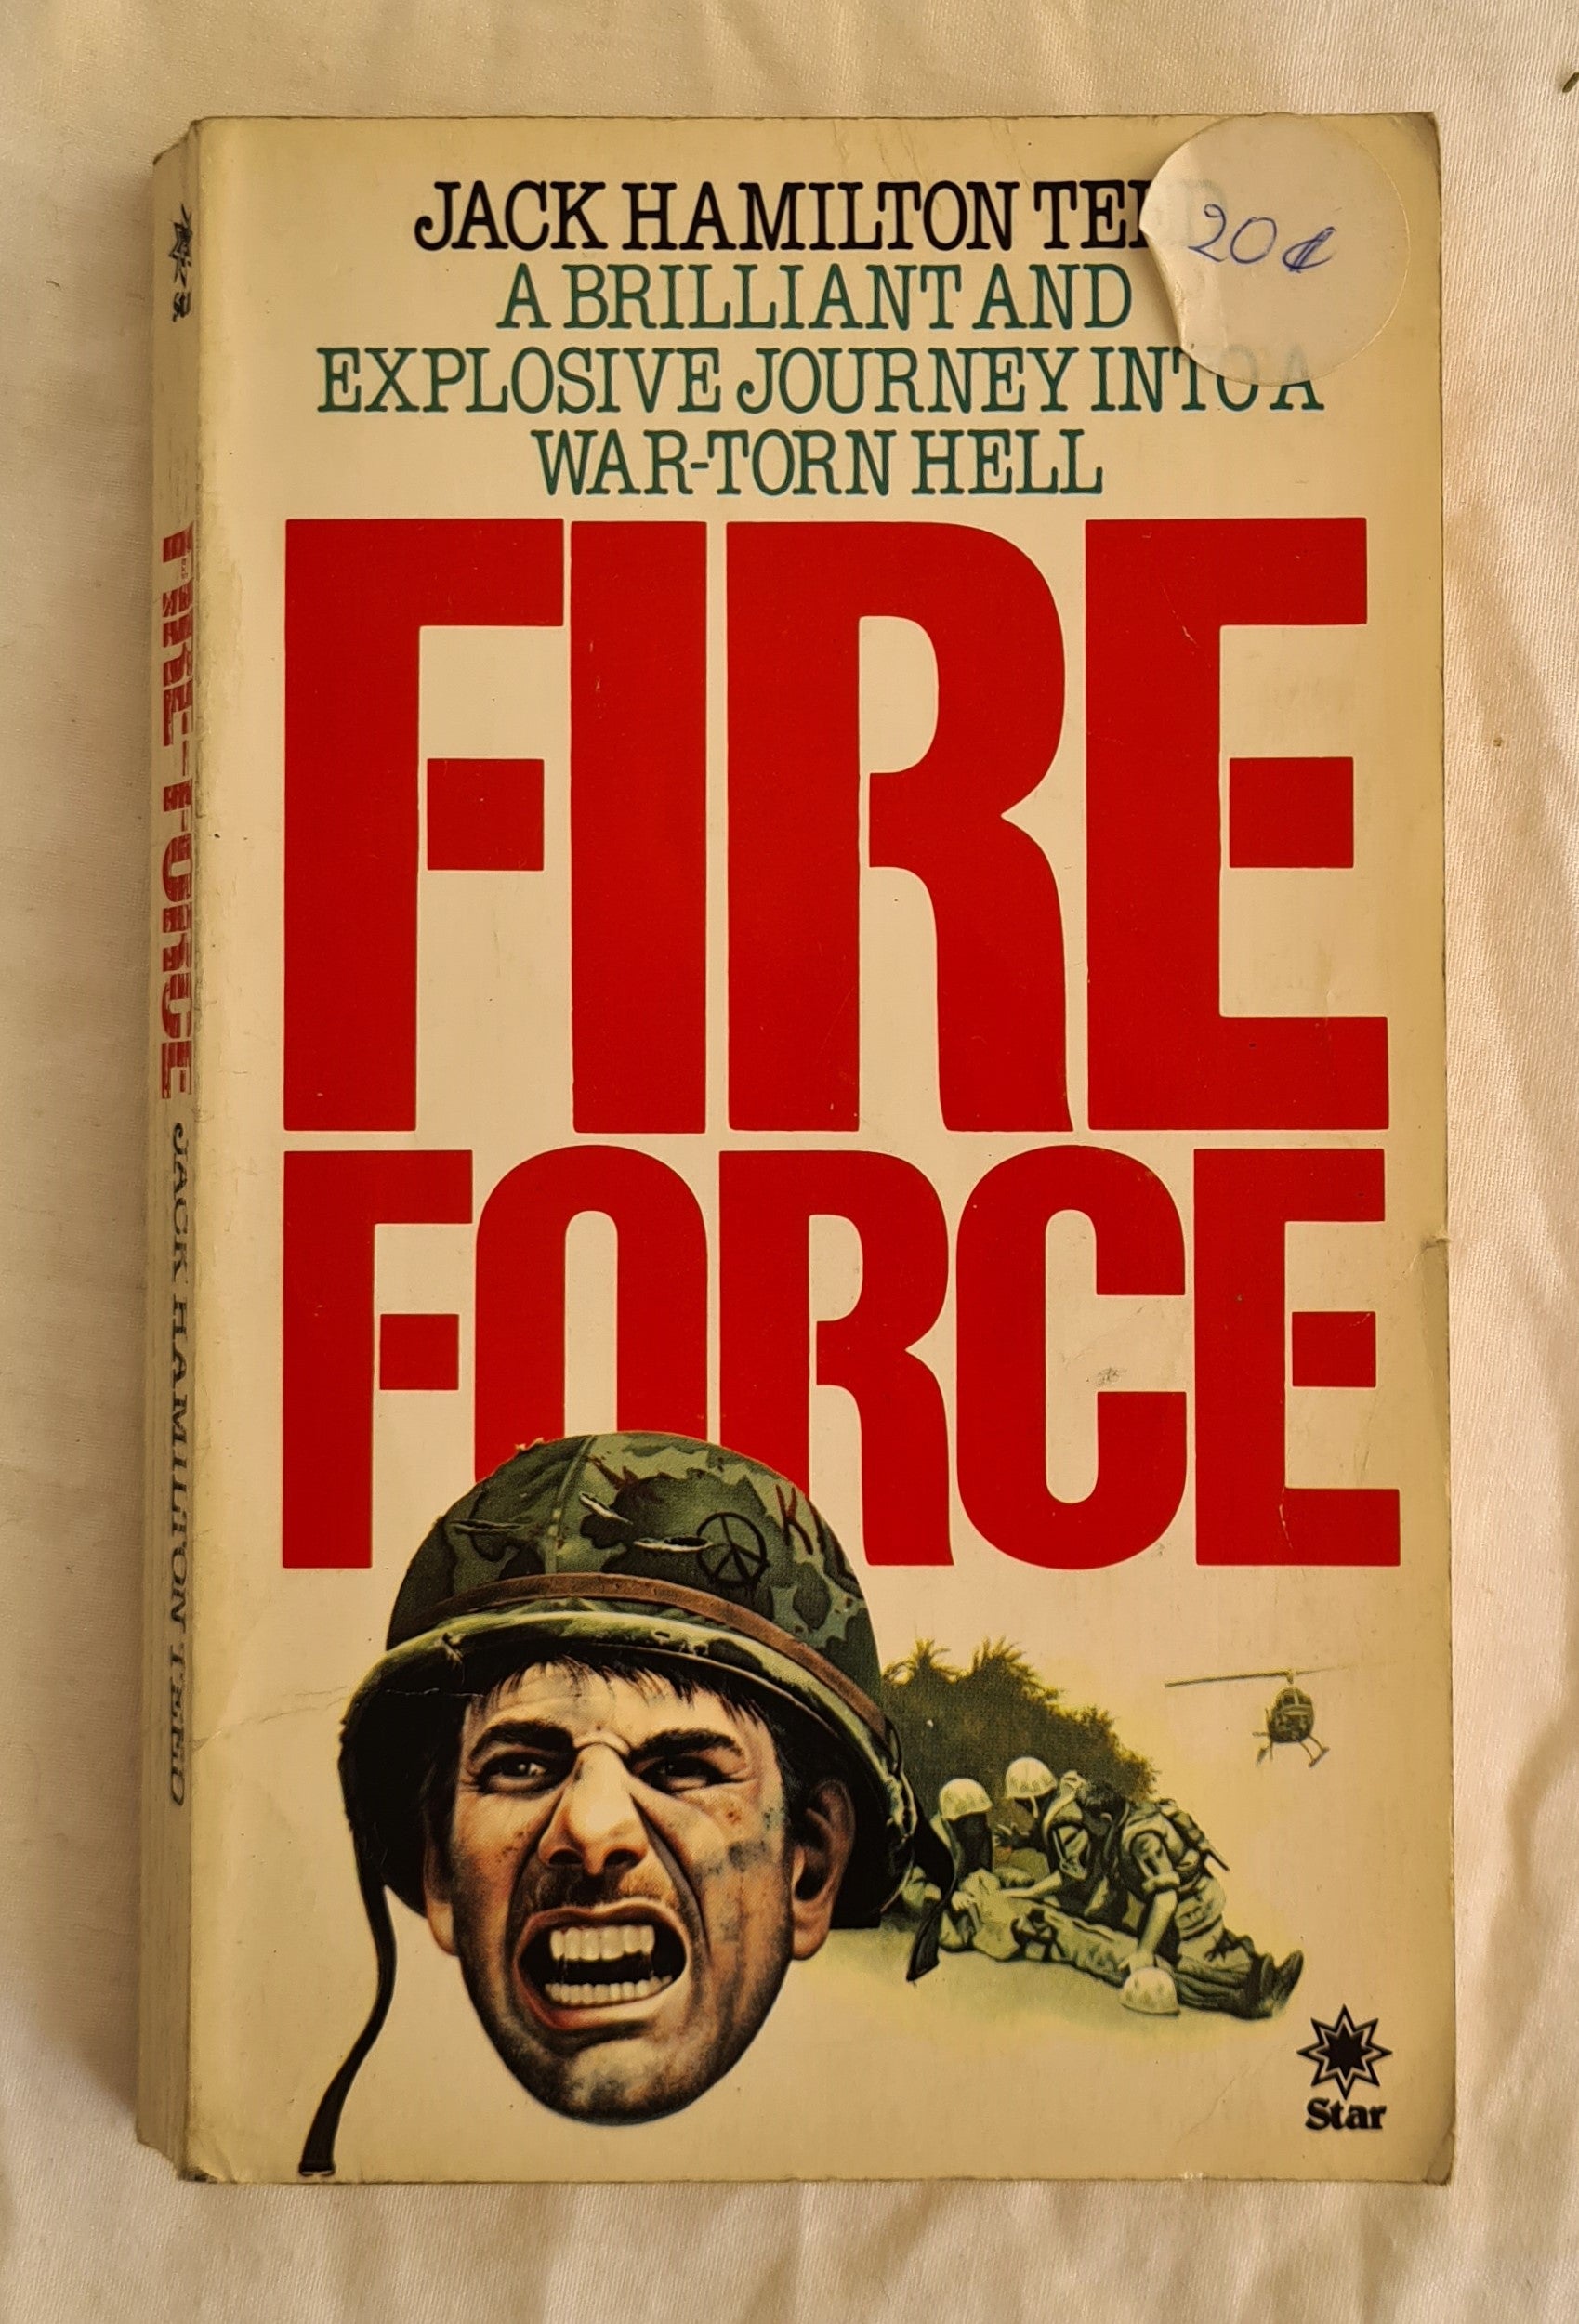 Fire-Force  by Jack Hamilton Teed  A Star Book